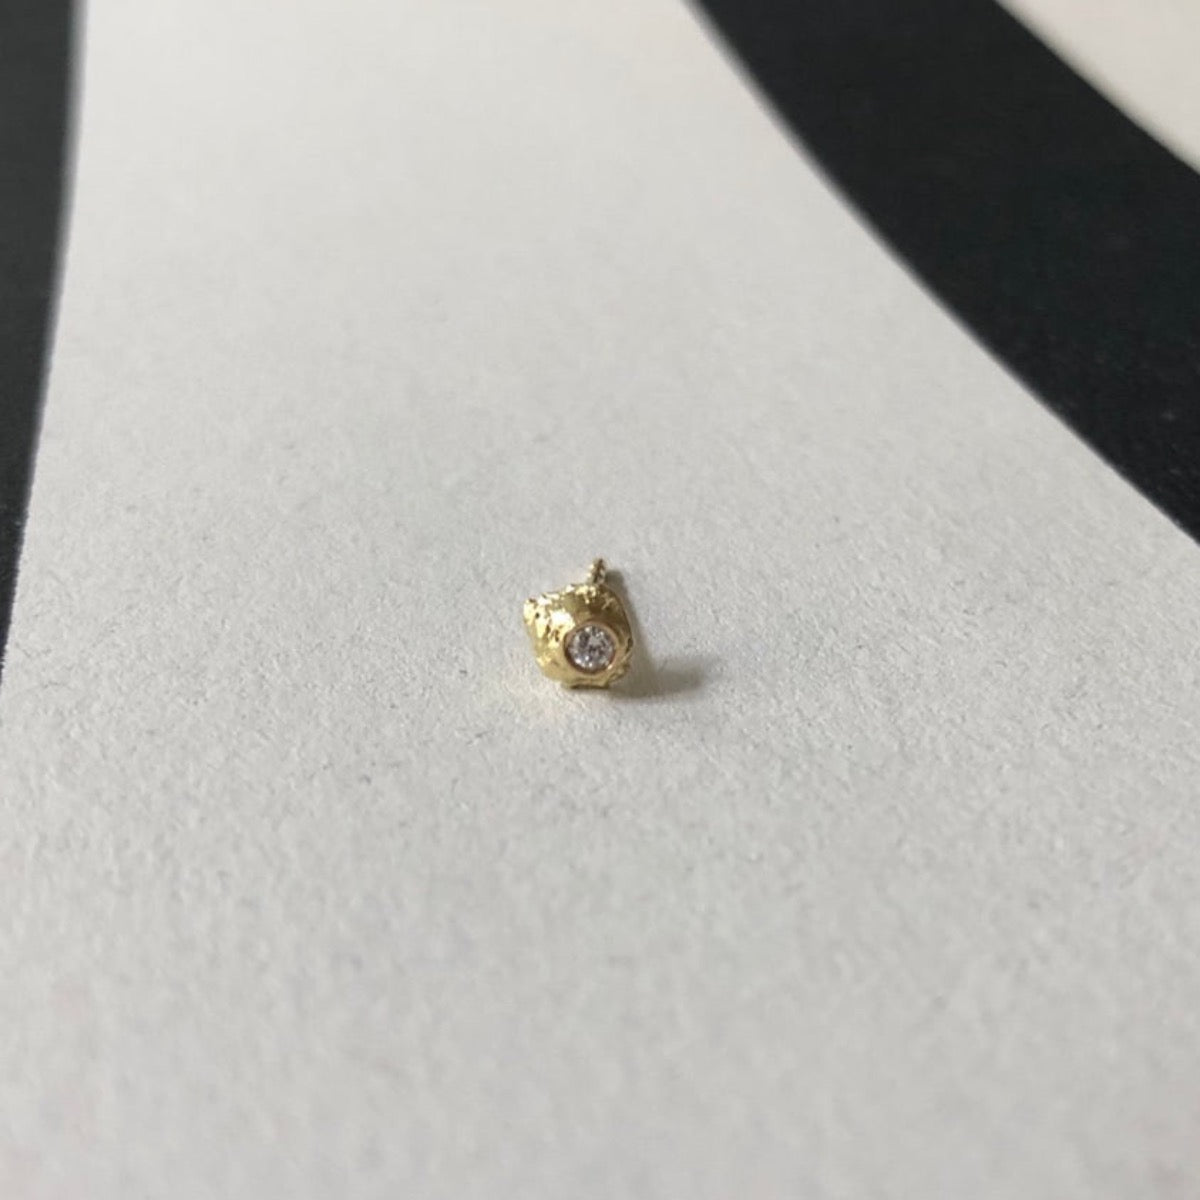 Lava diamond earring. 18 kt recycled gold and a  0.03ct Diamond